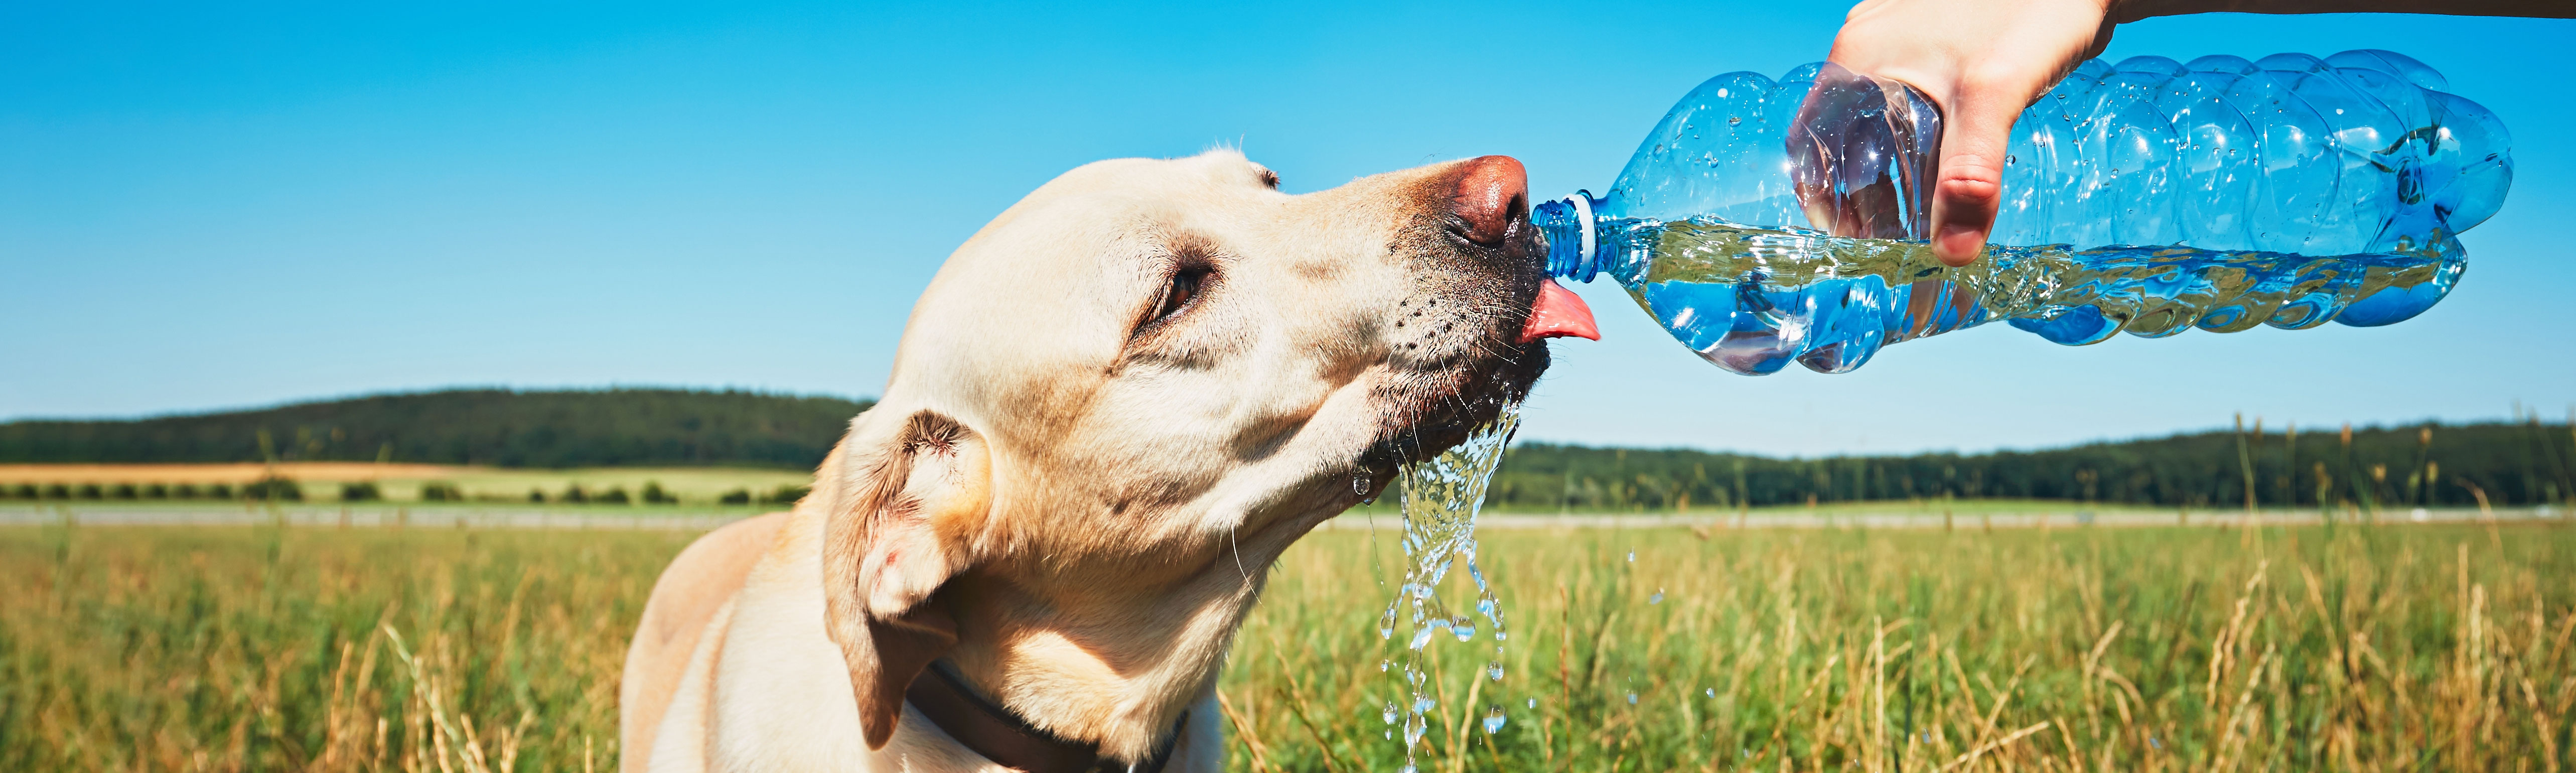 Yellow Labrador Retriever dog drinking water outside in a field